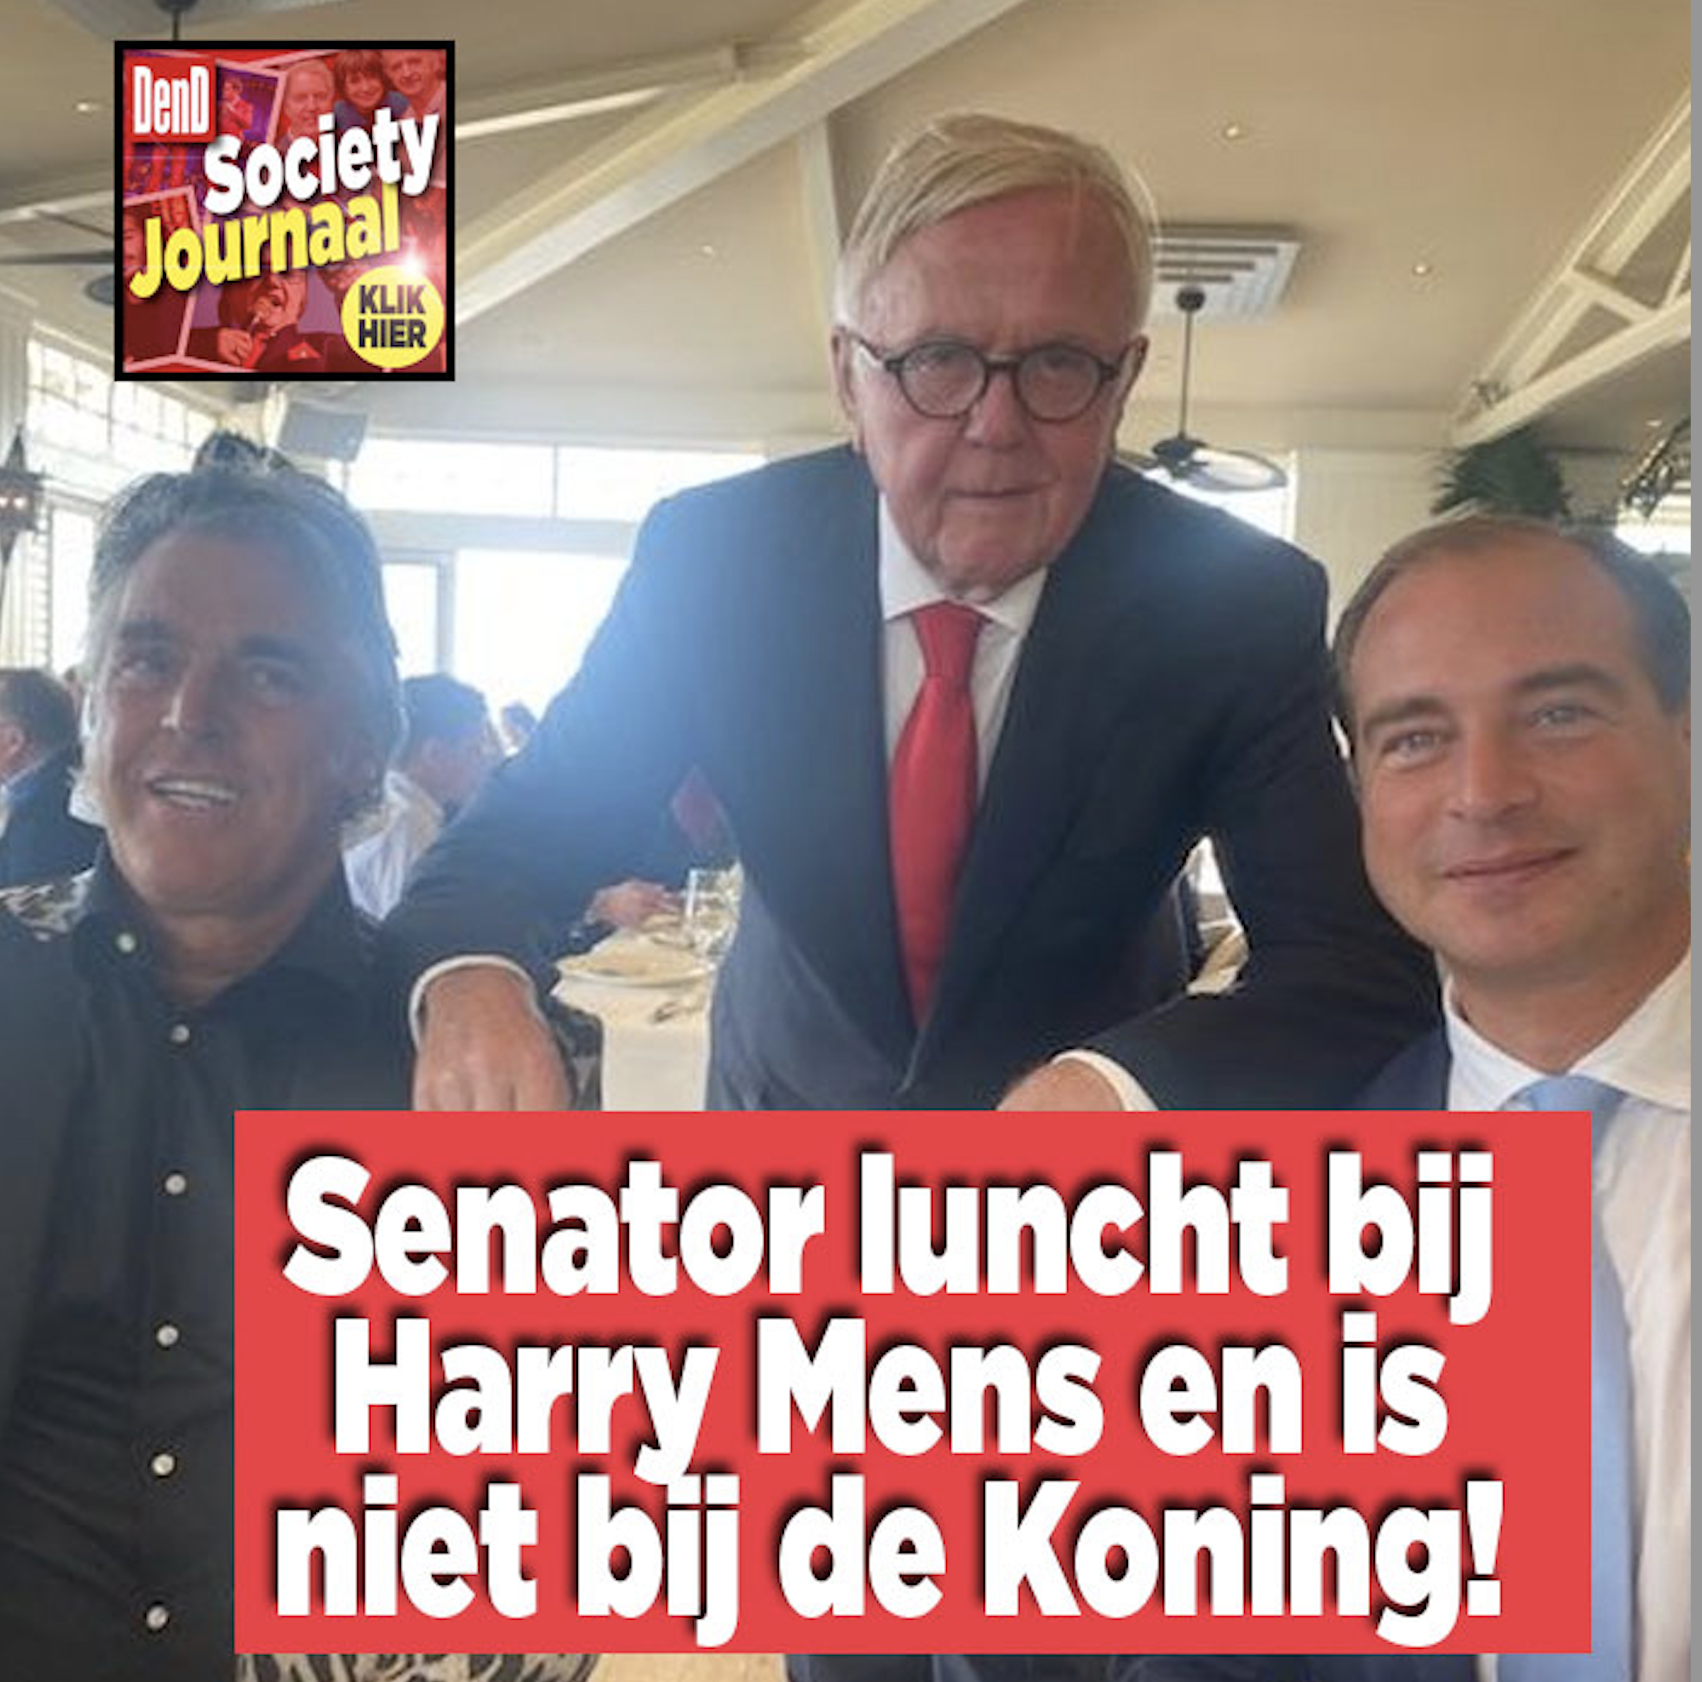 Harry mens lunch